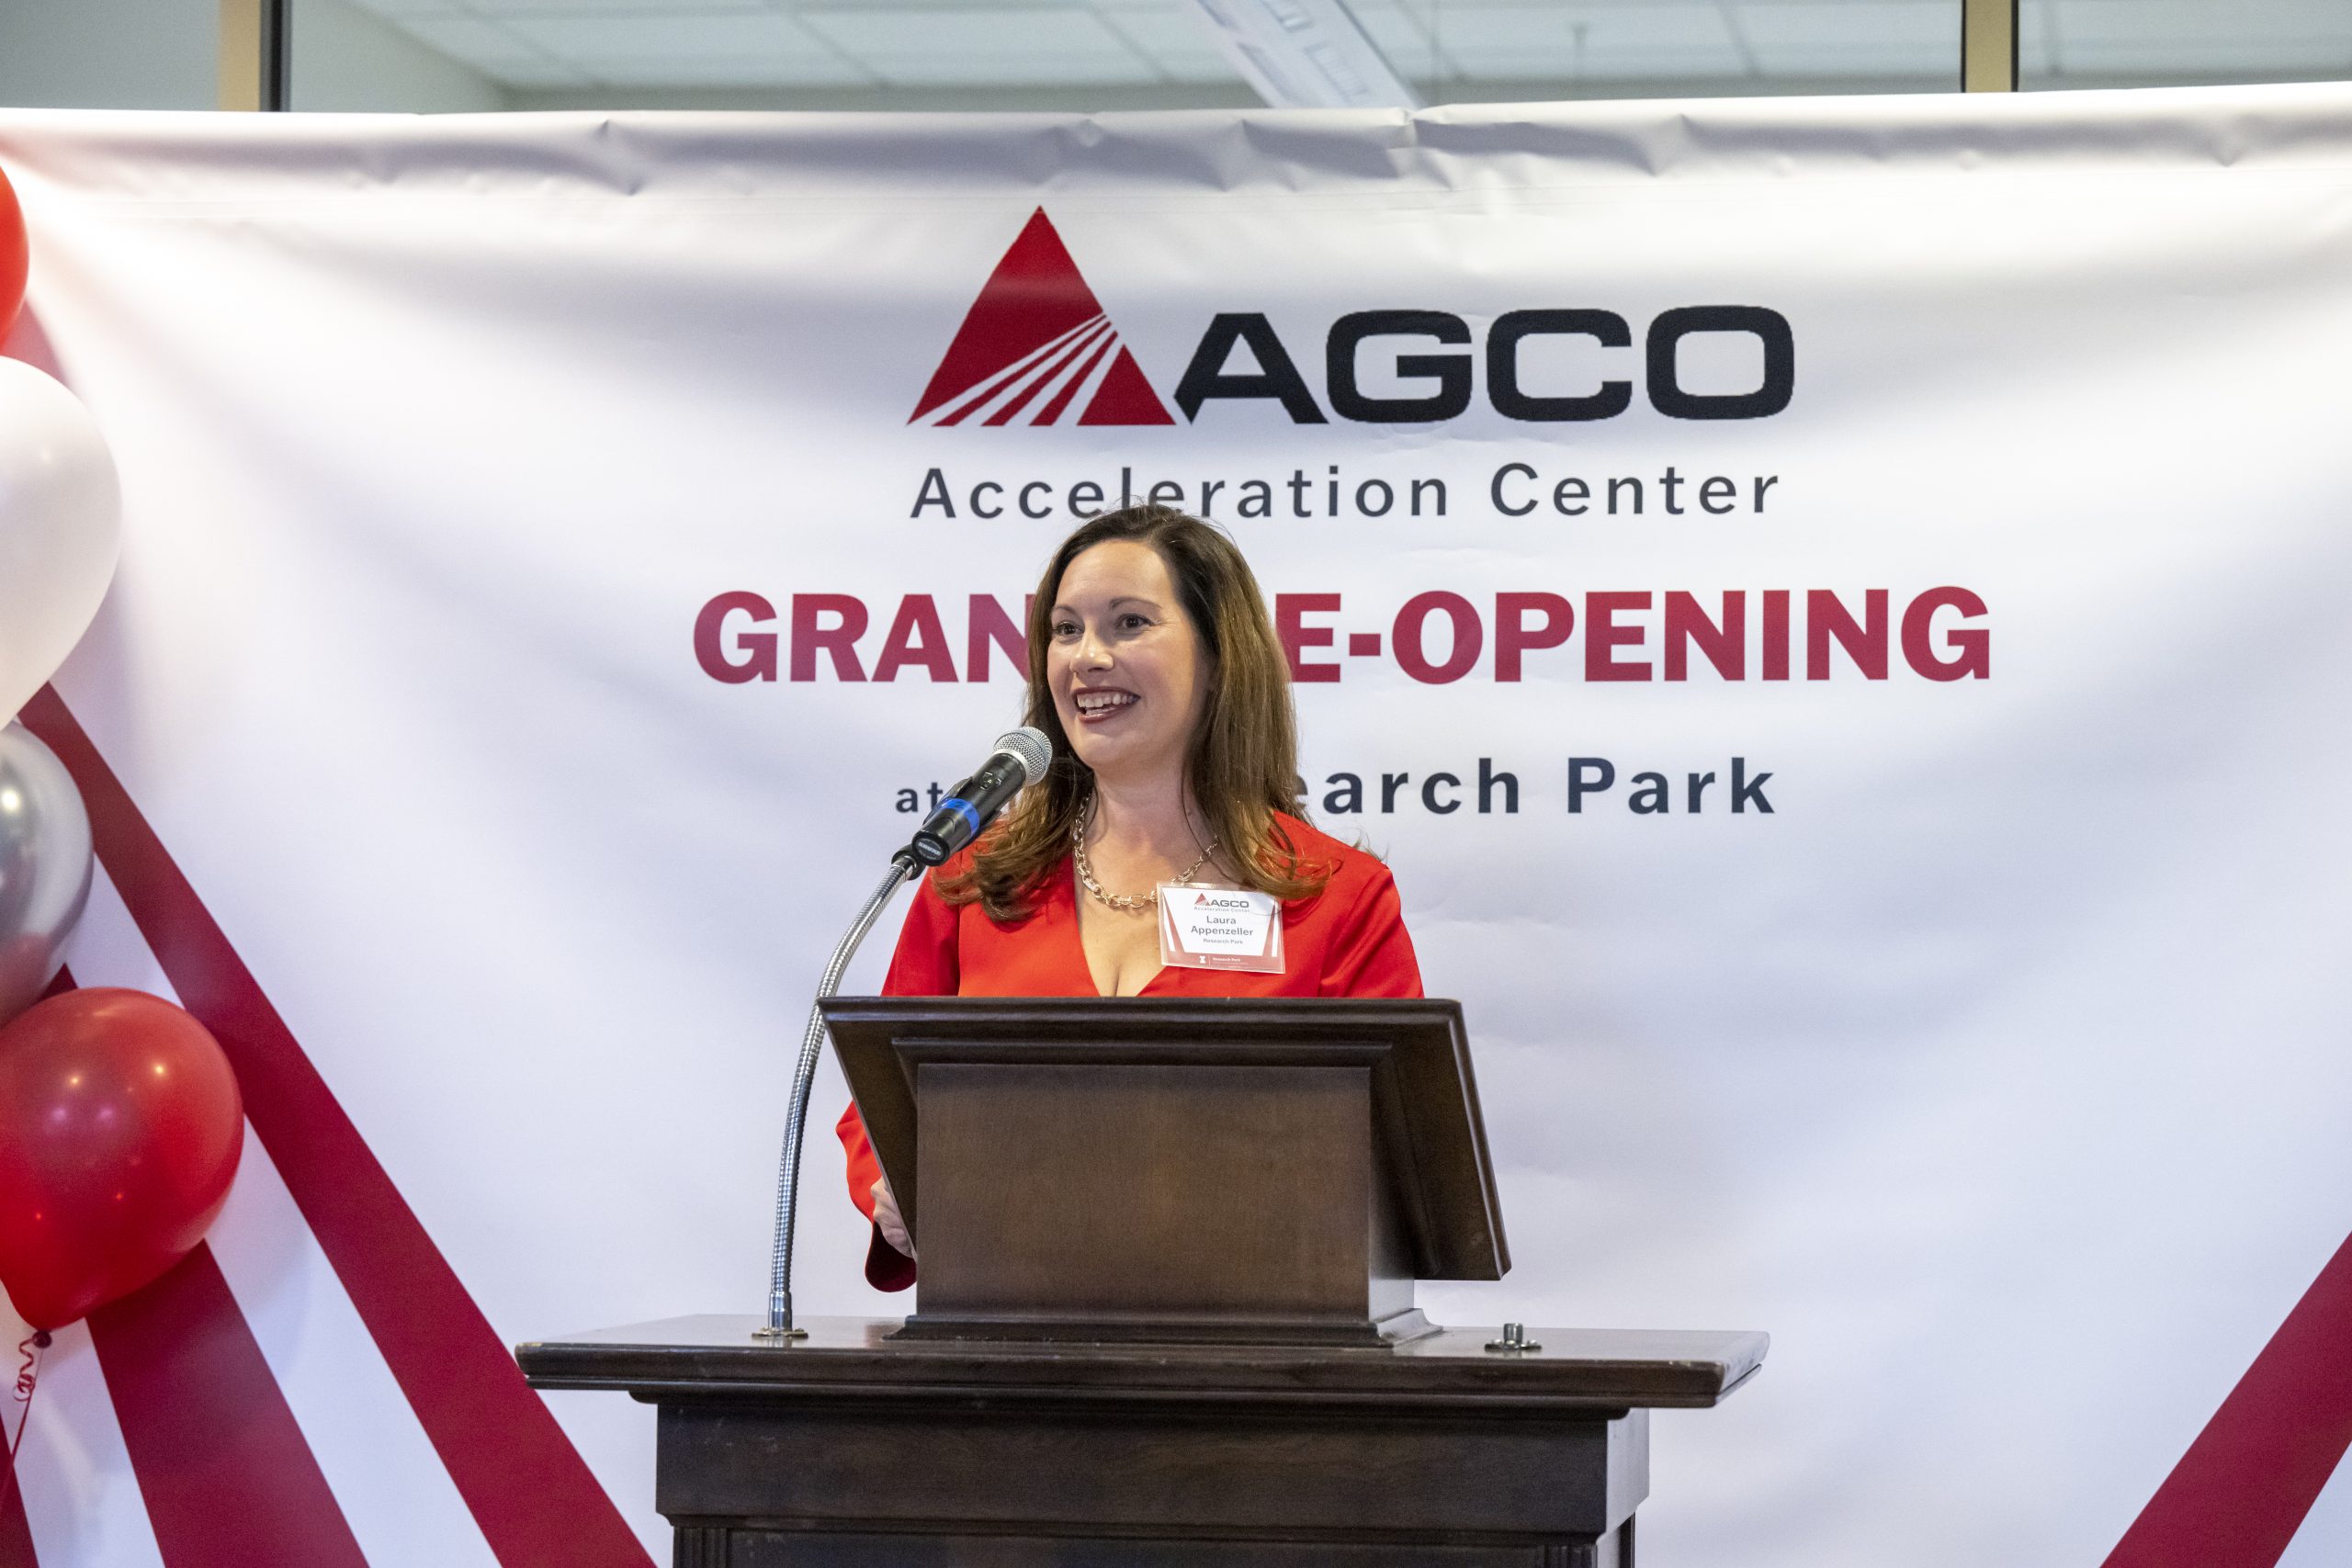 Laura Appenzeller speaking at Grand Re-Opening of AGCO.